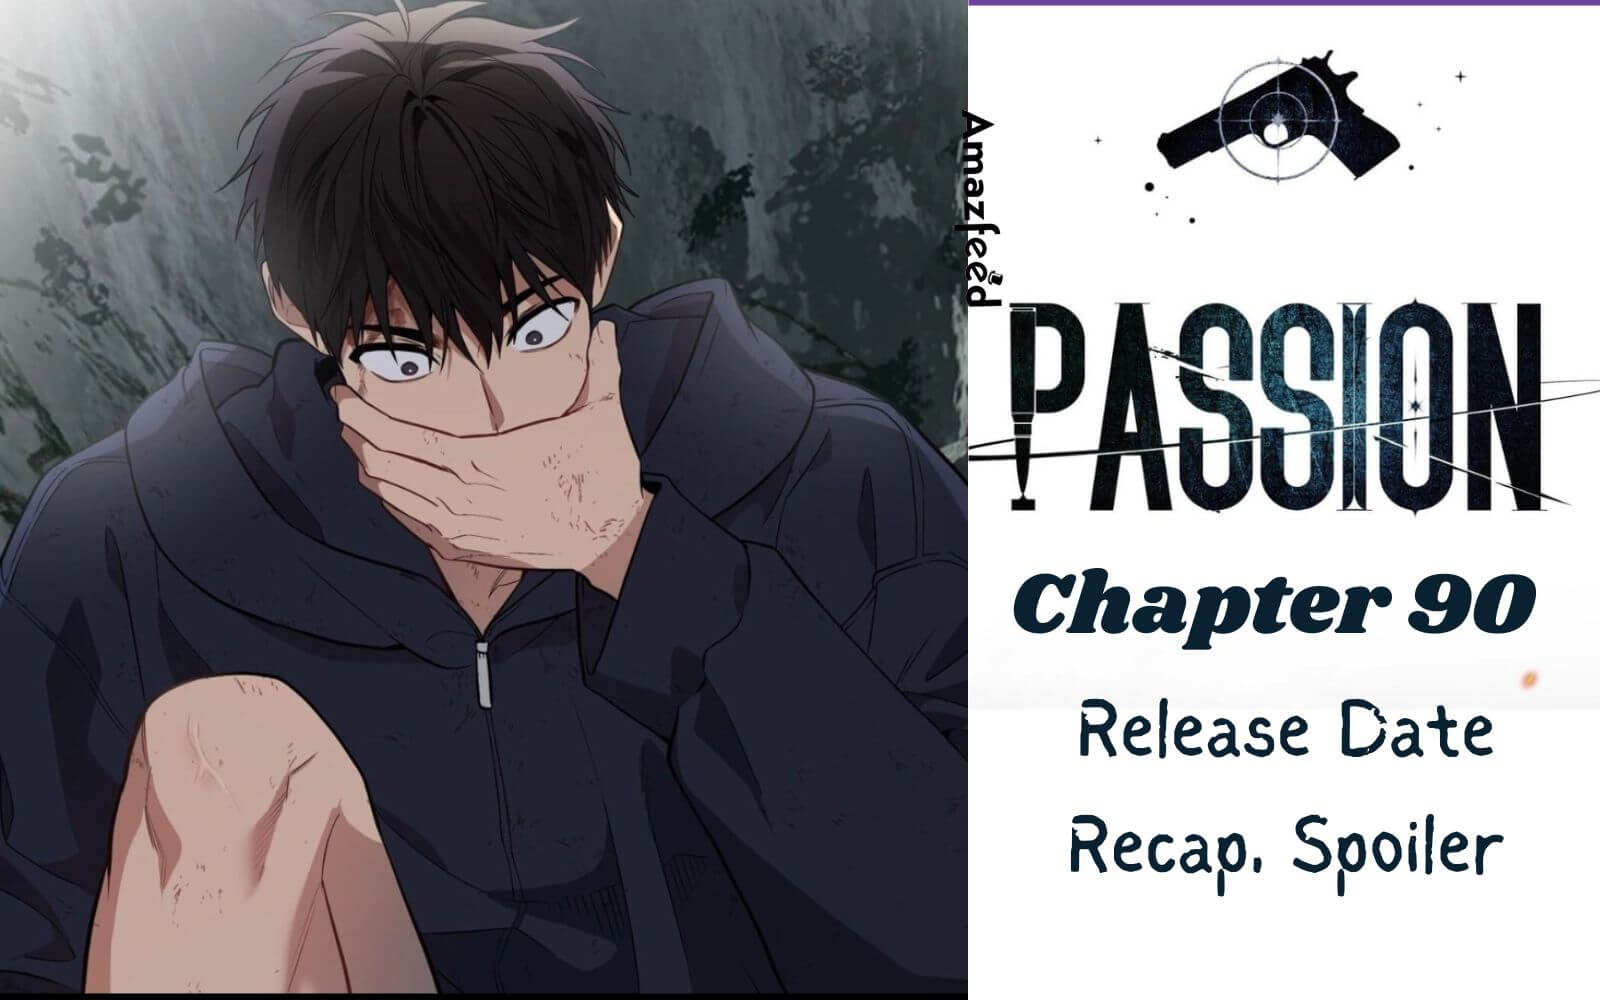 Passion Chapter 90 Release Date, Recap, Spoiler, Raw Scan Date